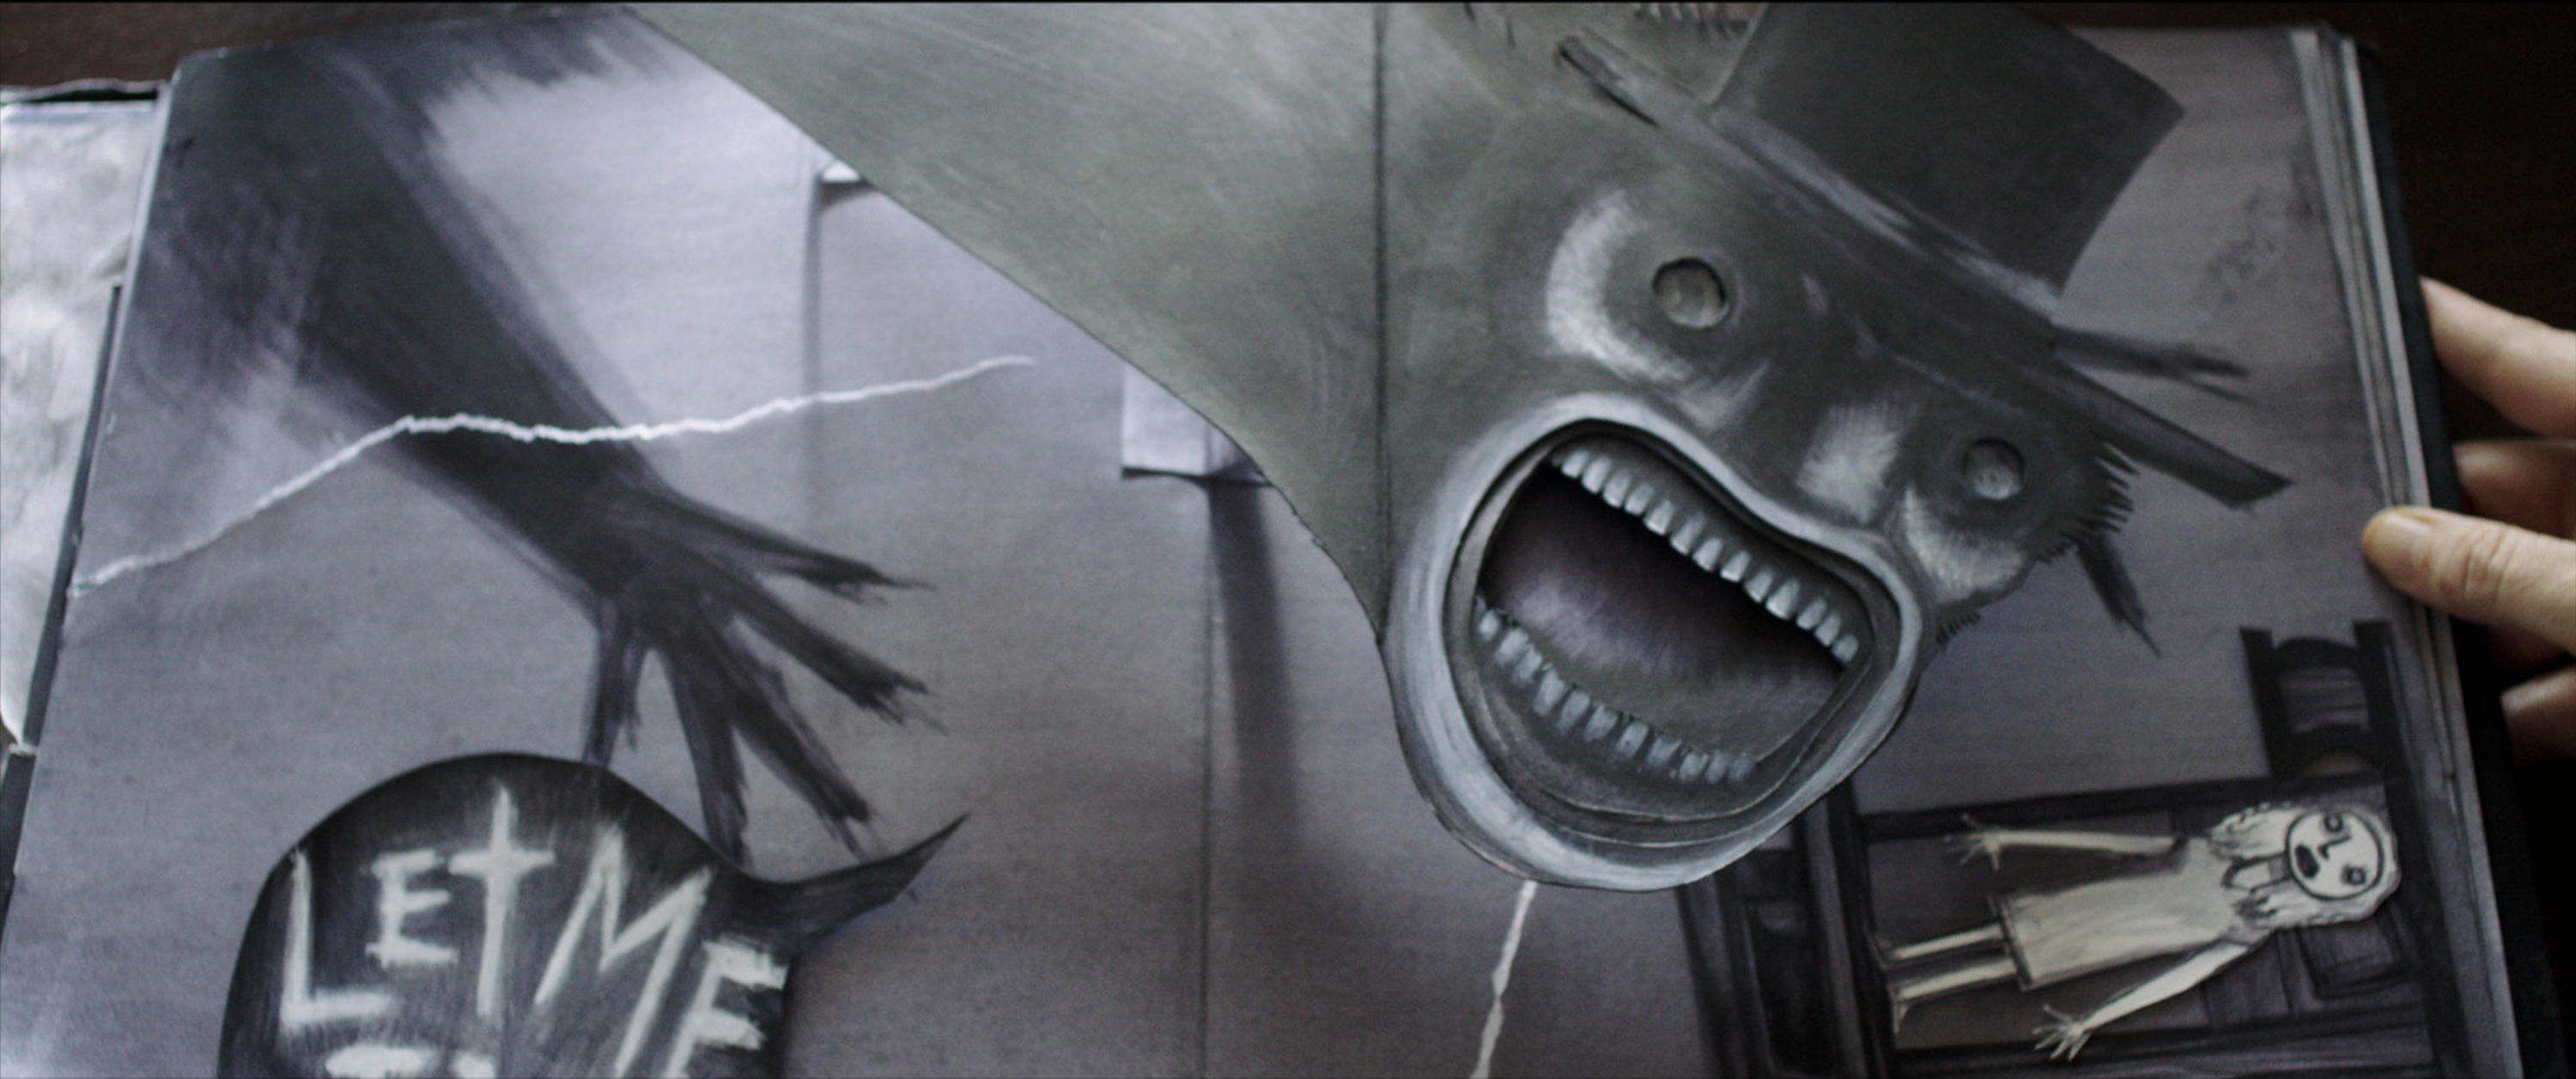 A terrifying black-and-white pop-up book features a screaming monster